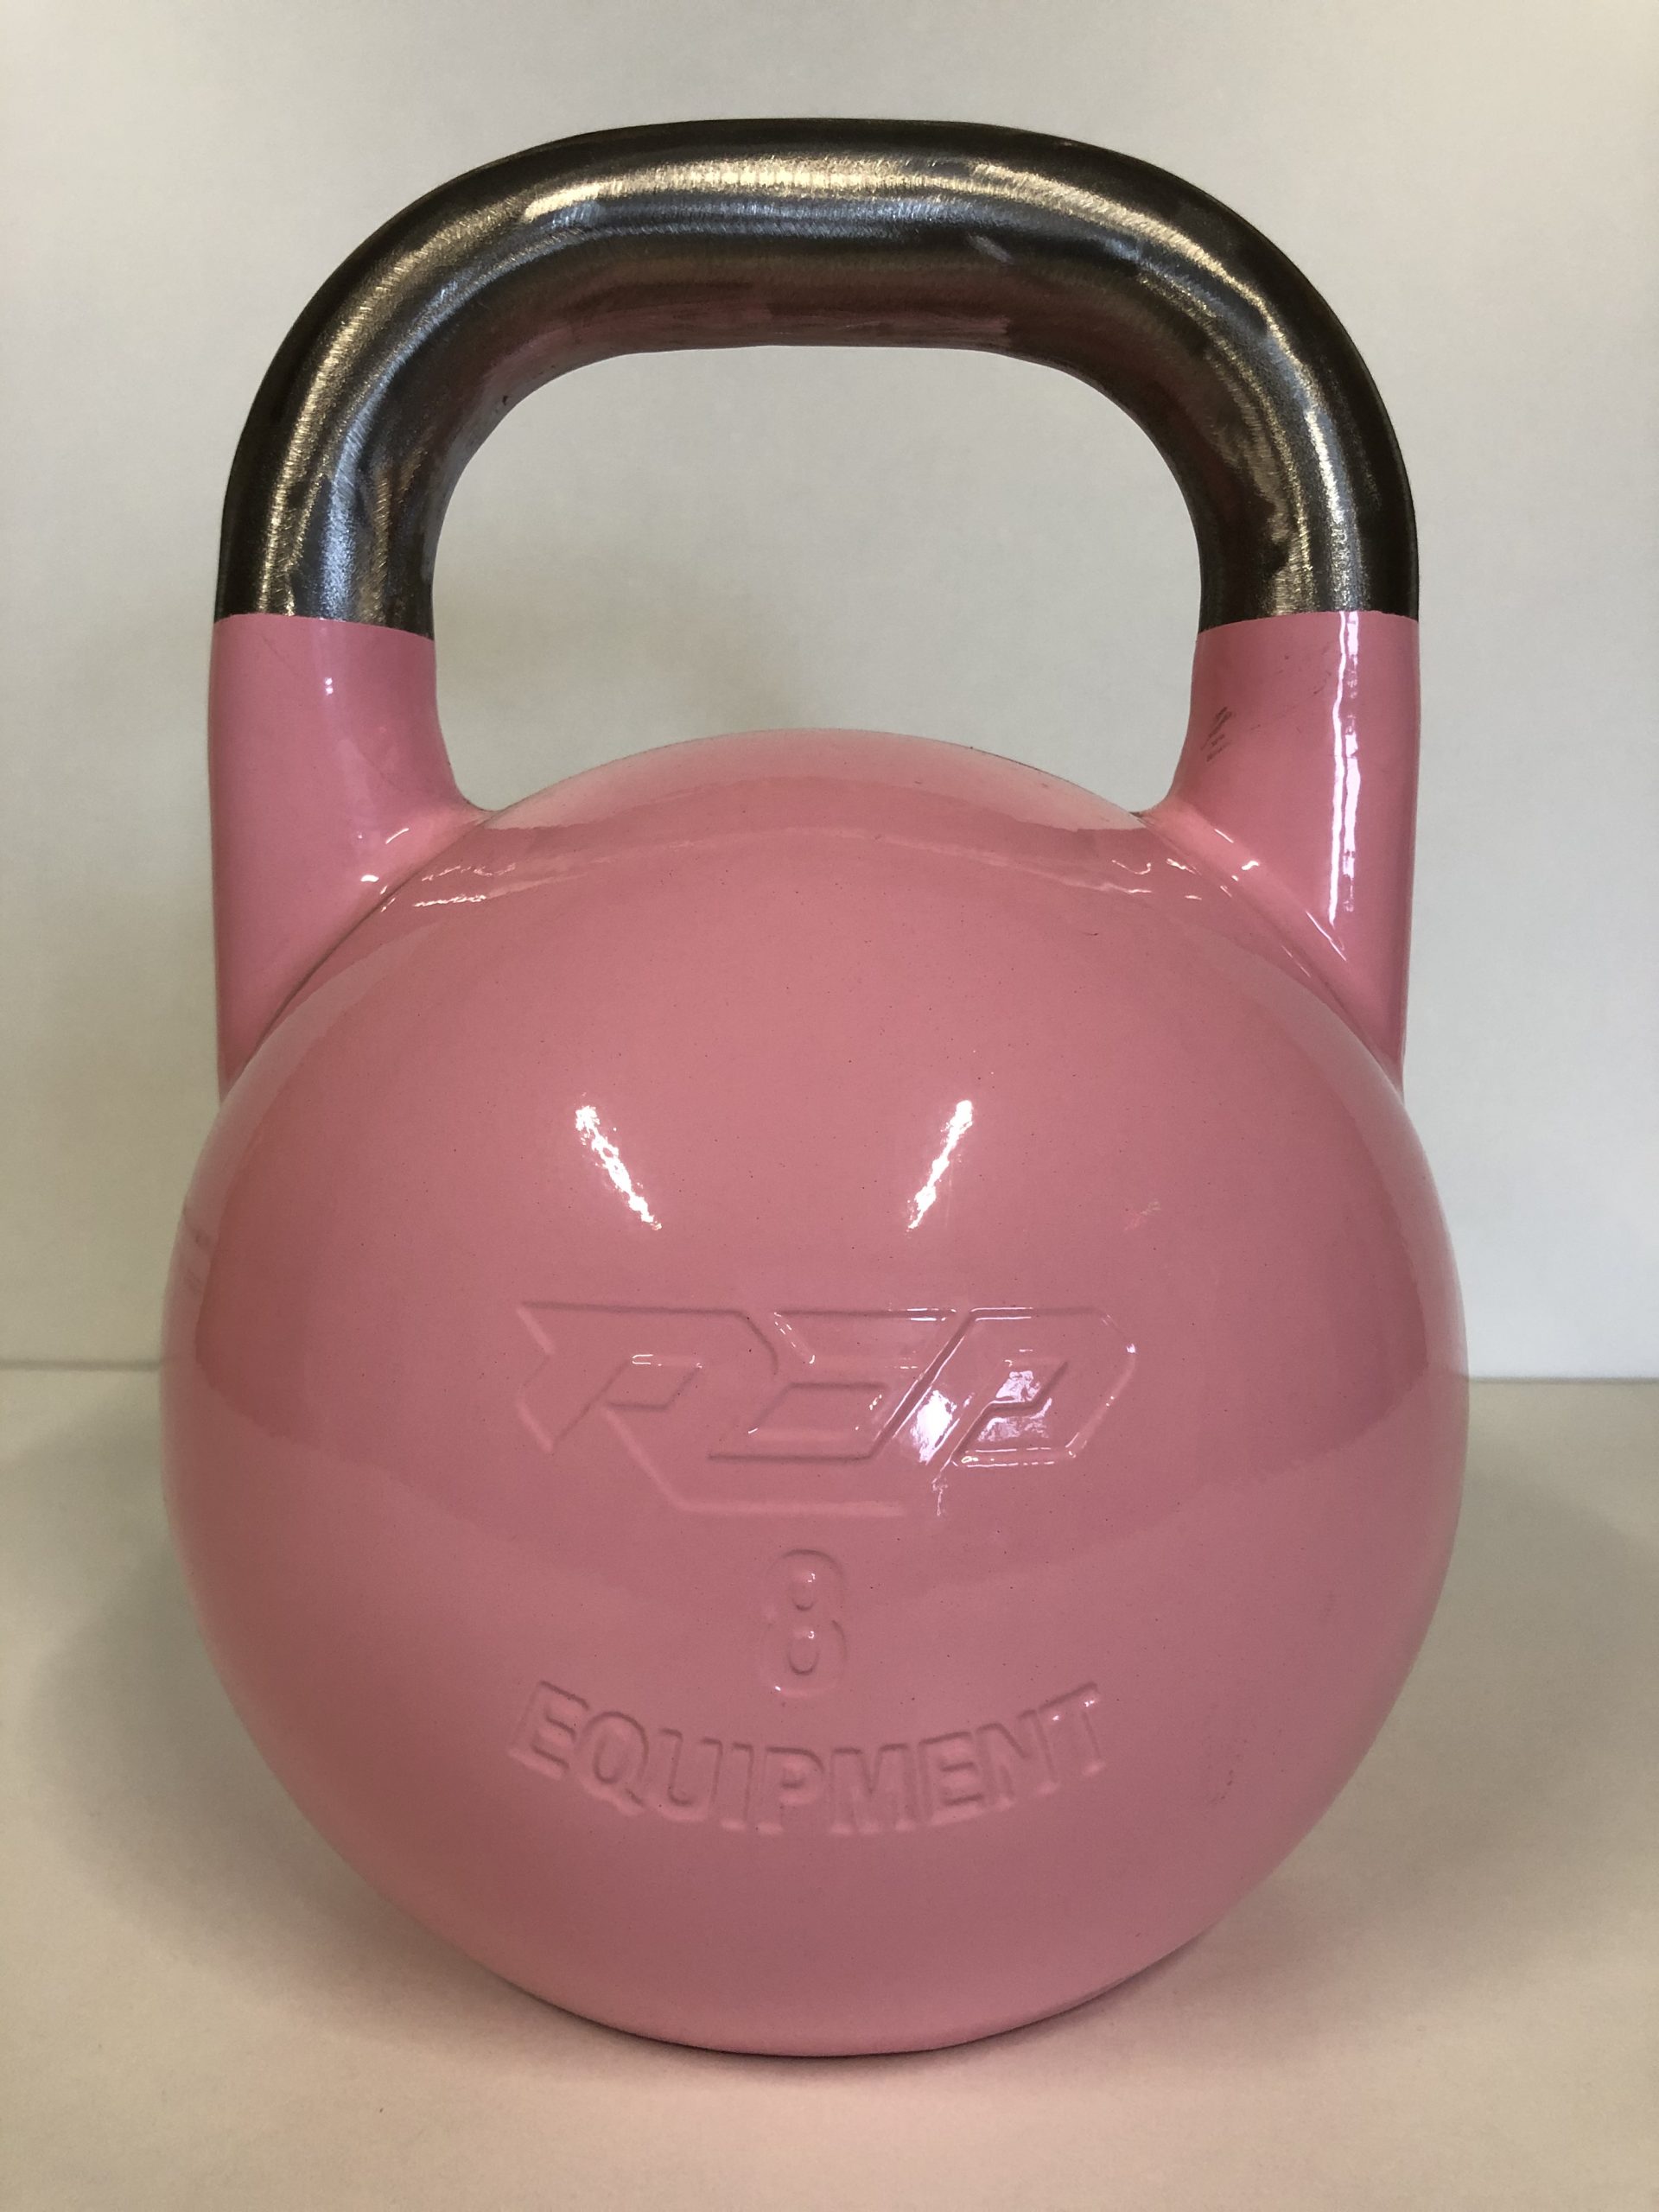 Download COMPETITION KETTLEBELL COLOR - Repequipment